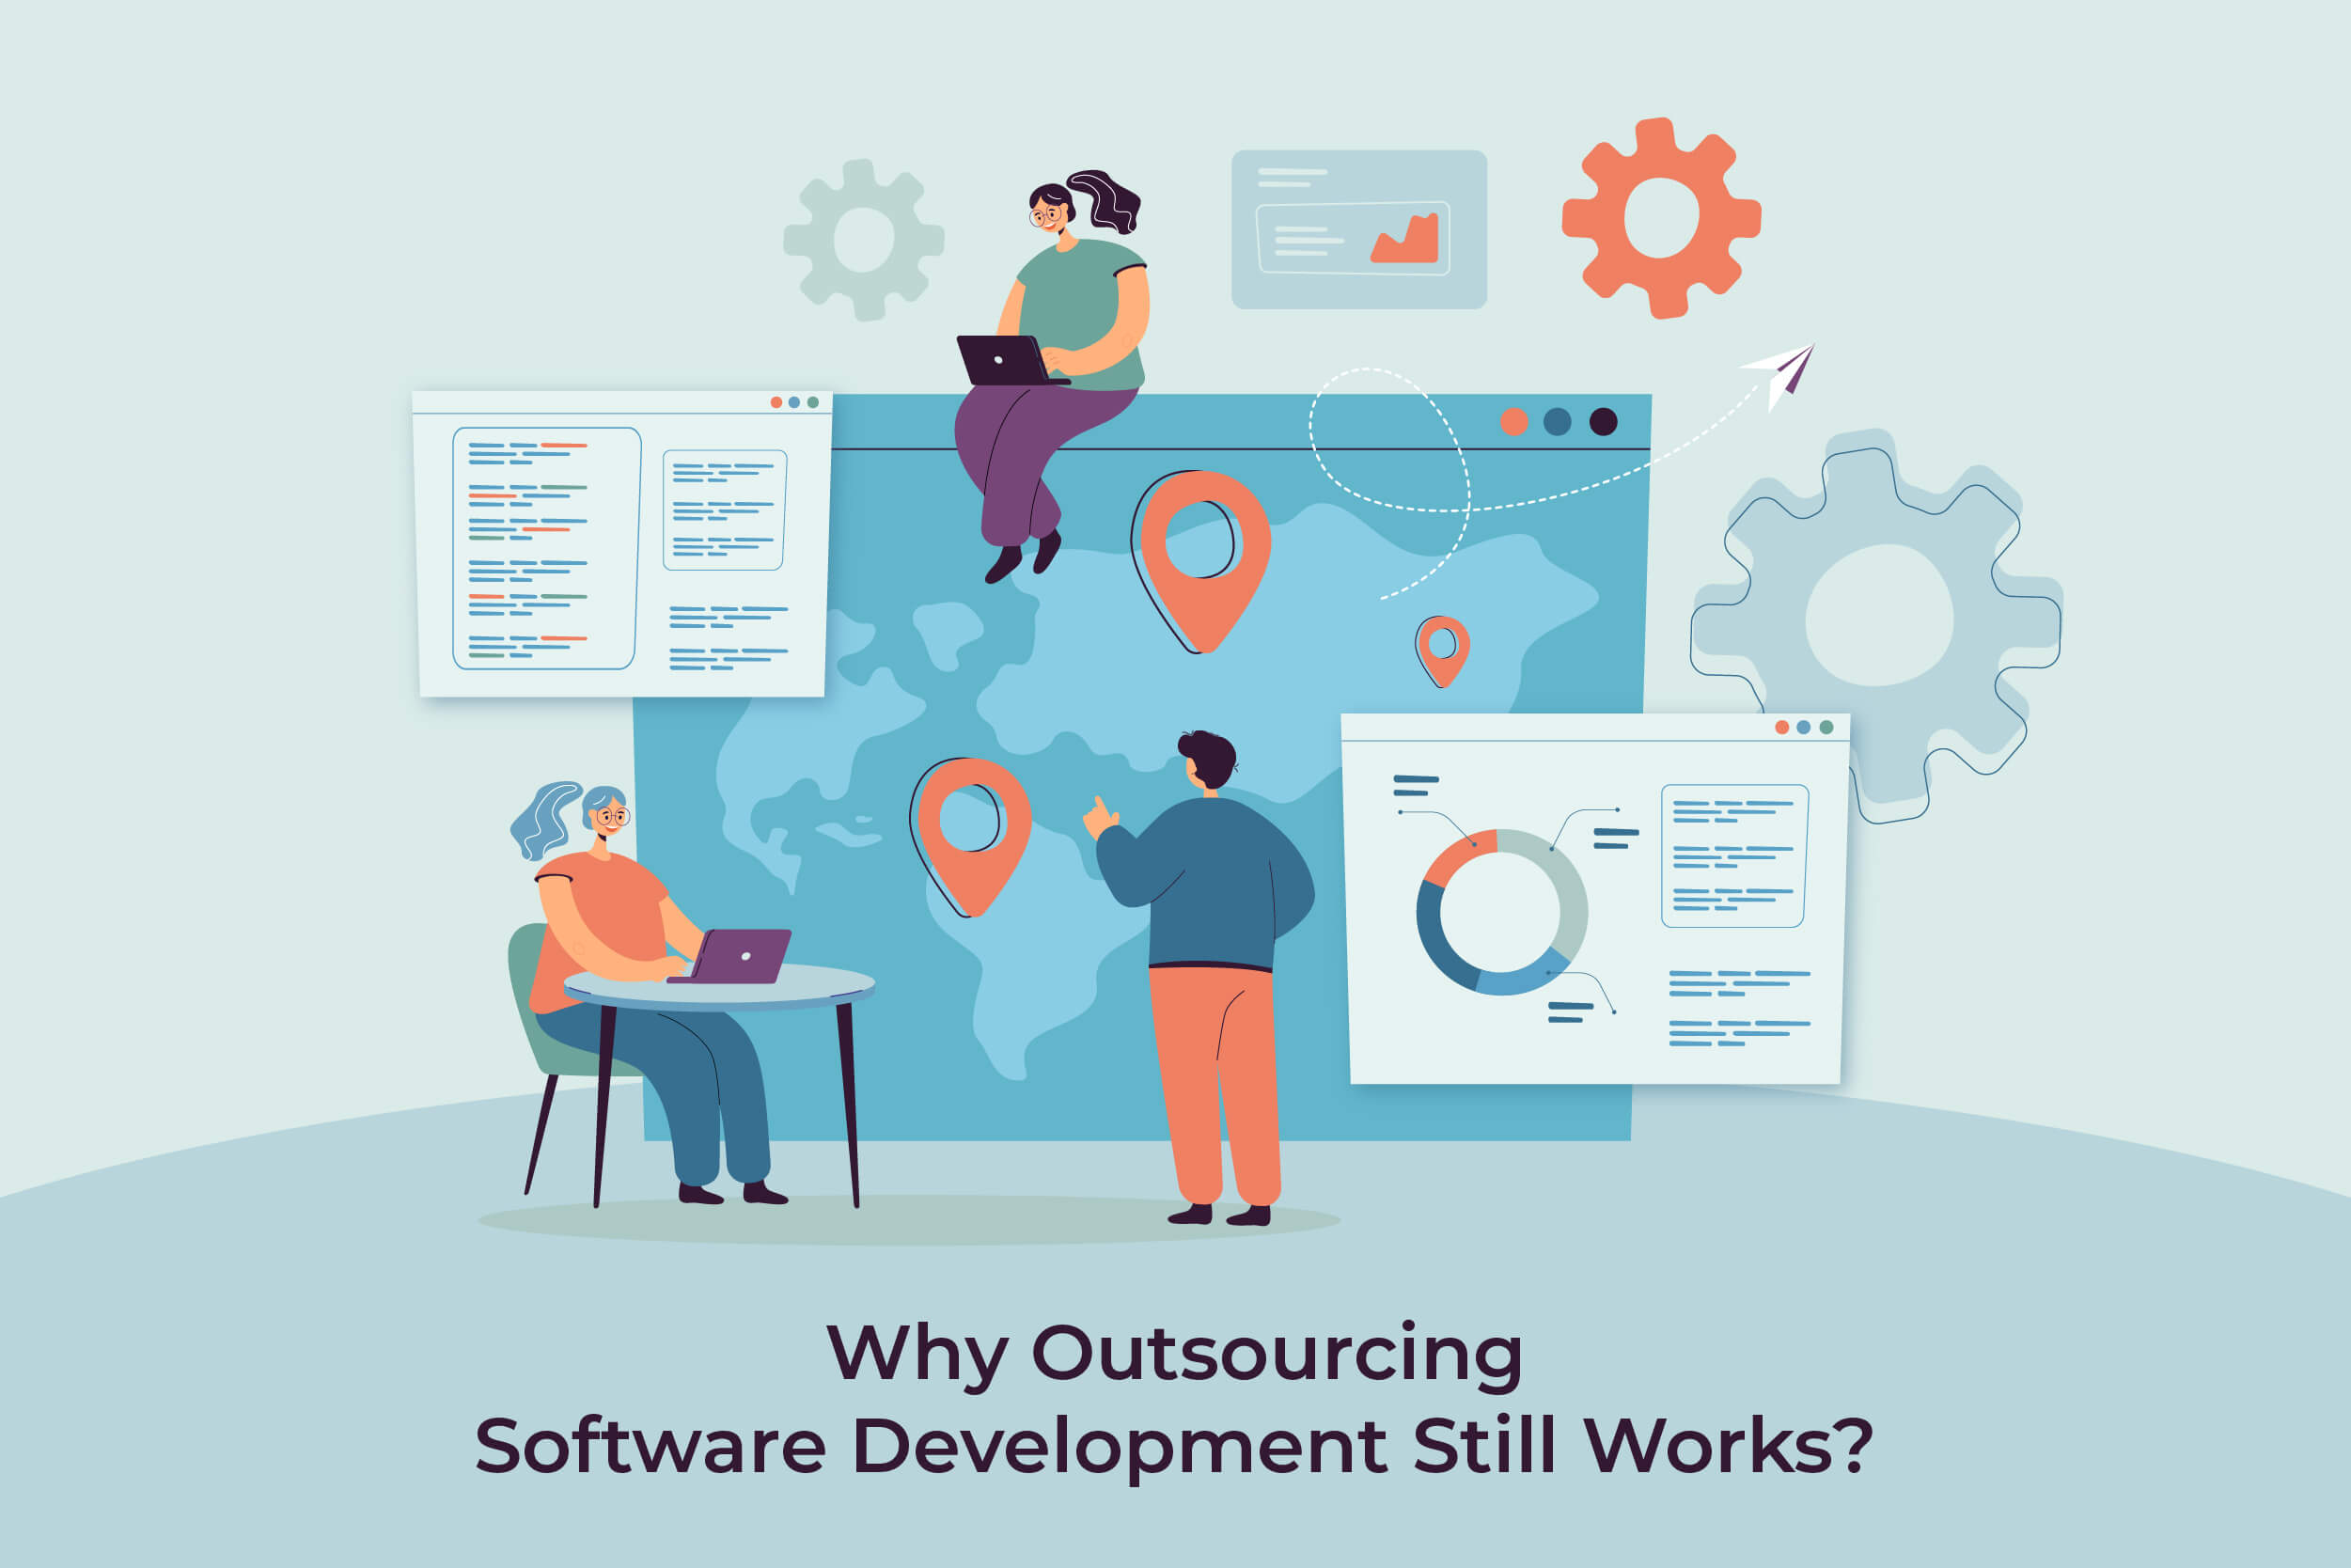 Why Outsourcing Software Development Still Works?